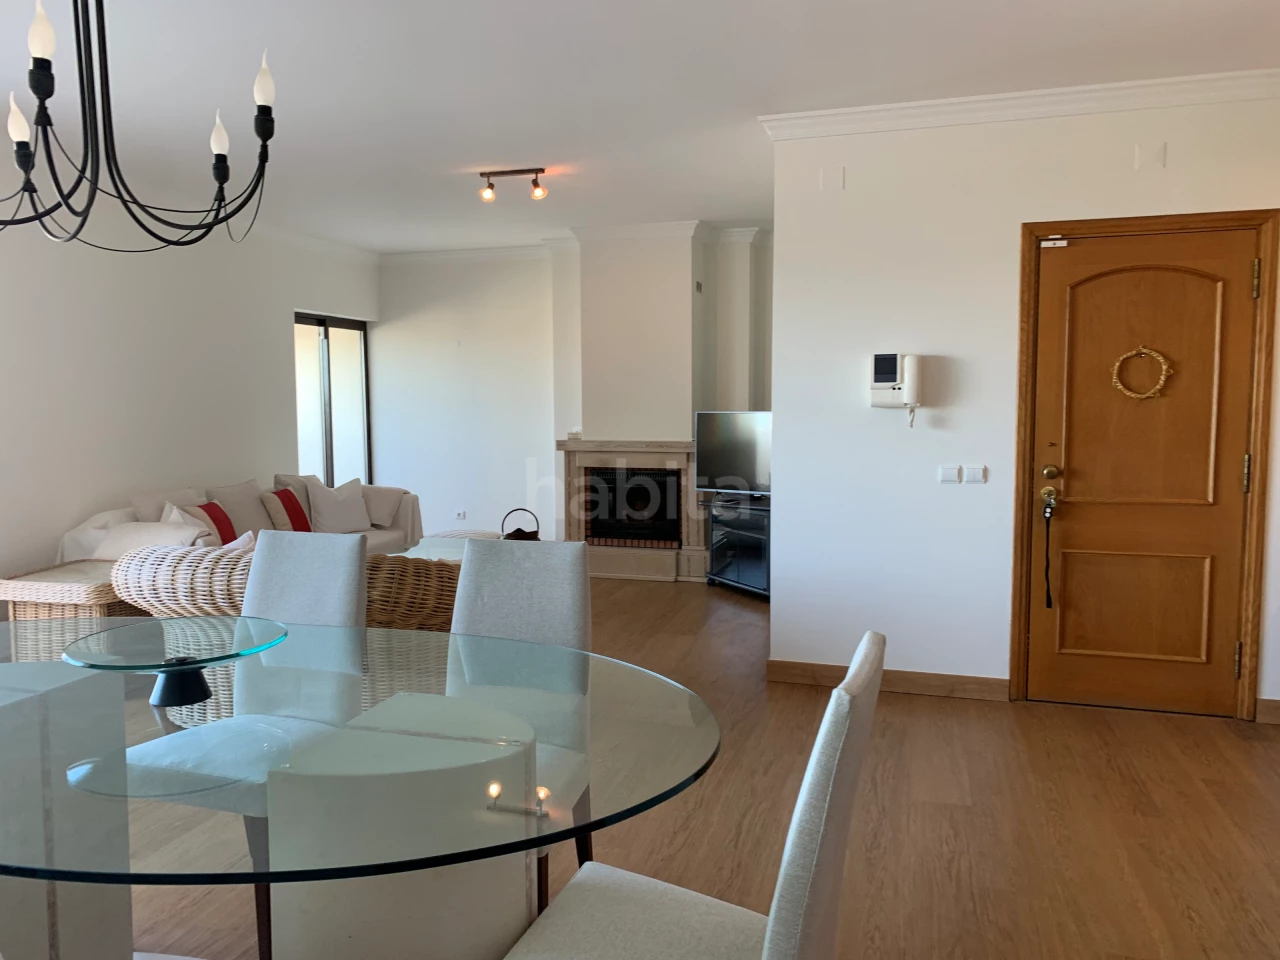 2 BEDROOM FLAT WITH GARAGE IN FARO